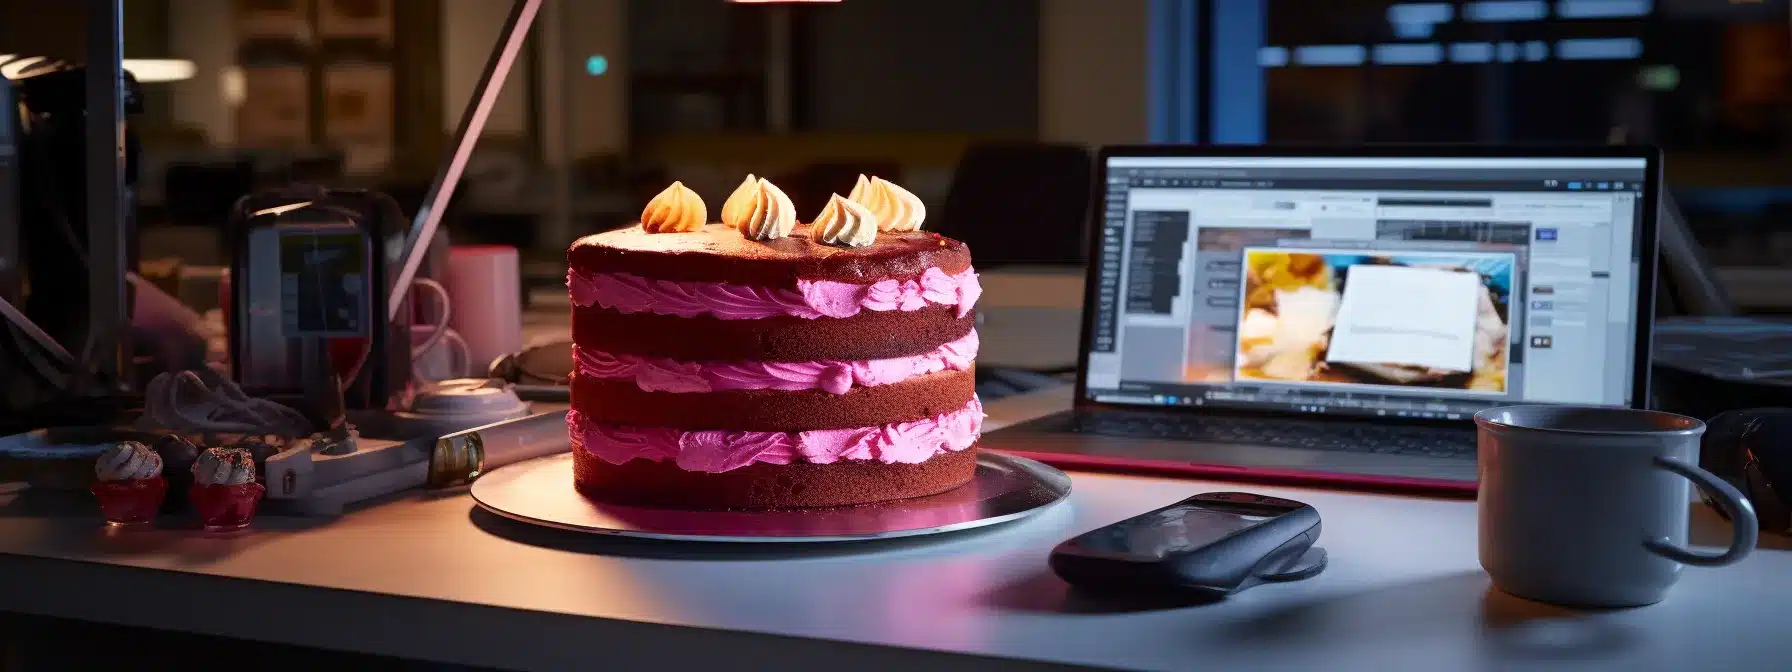 A Tri-Layered Cake With Cyber Liability Insurance On Top, Surrounded By Software Updates, Antivirus Controls, And Regulatory Compliance Measures.